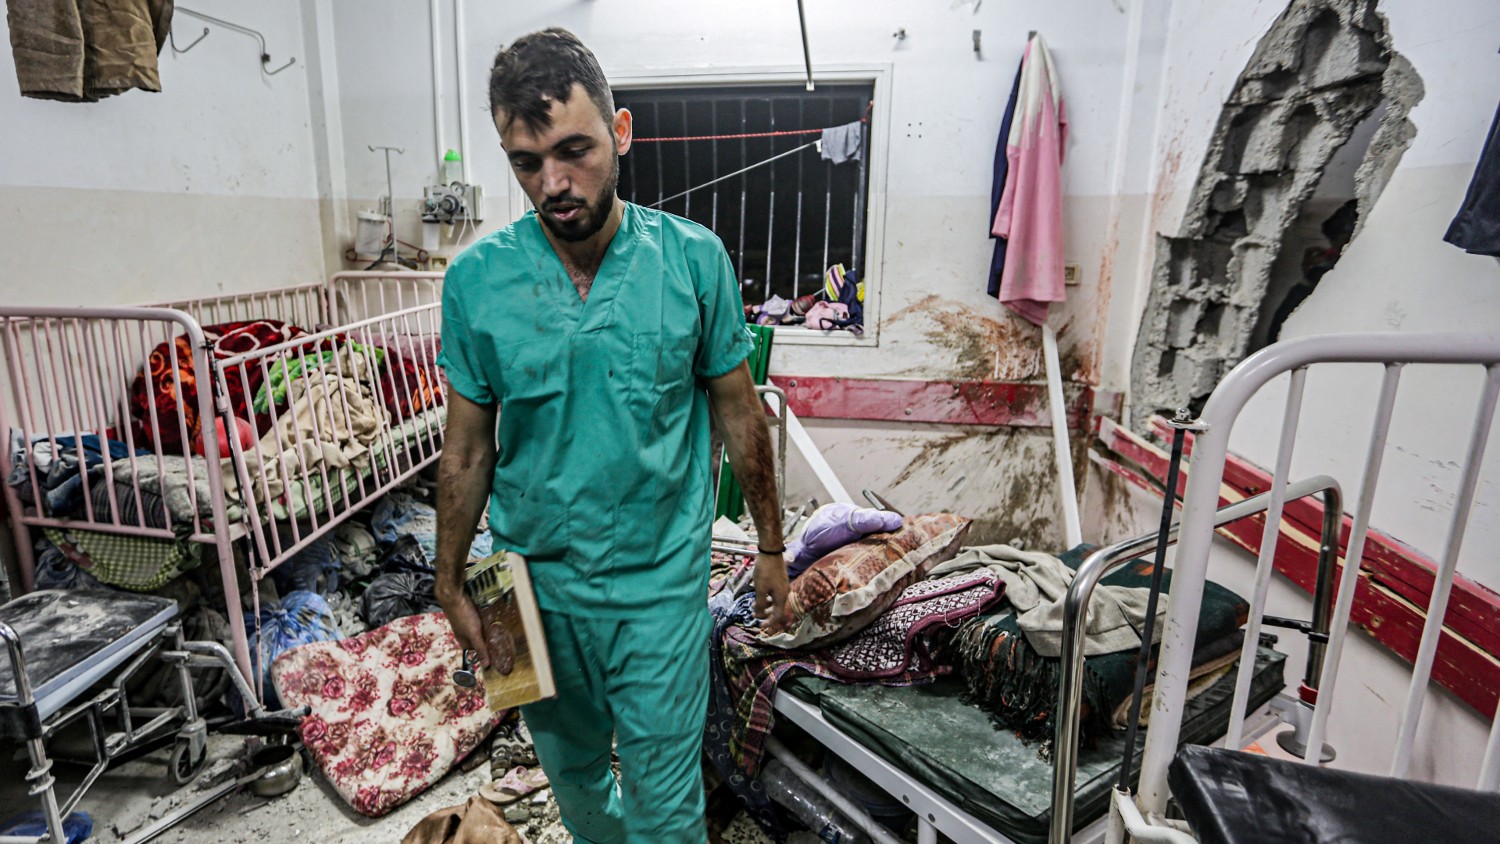 war-on-gaza:-palestinian-doctor-asks-biden-how-‘many-more-need-to-die’-before-us-demands-ceasefire